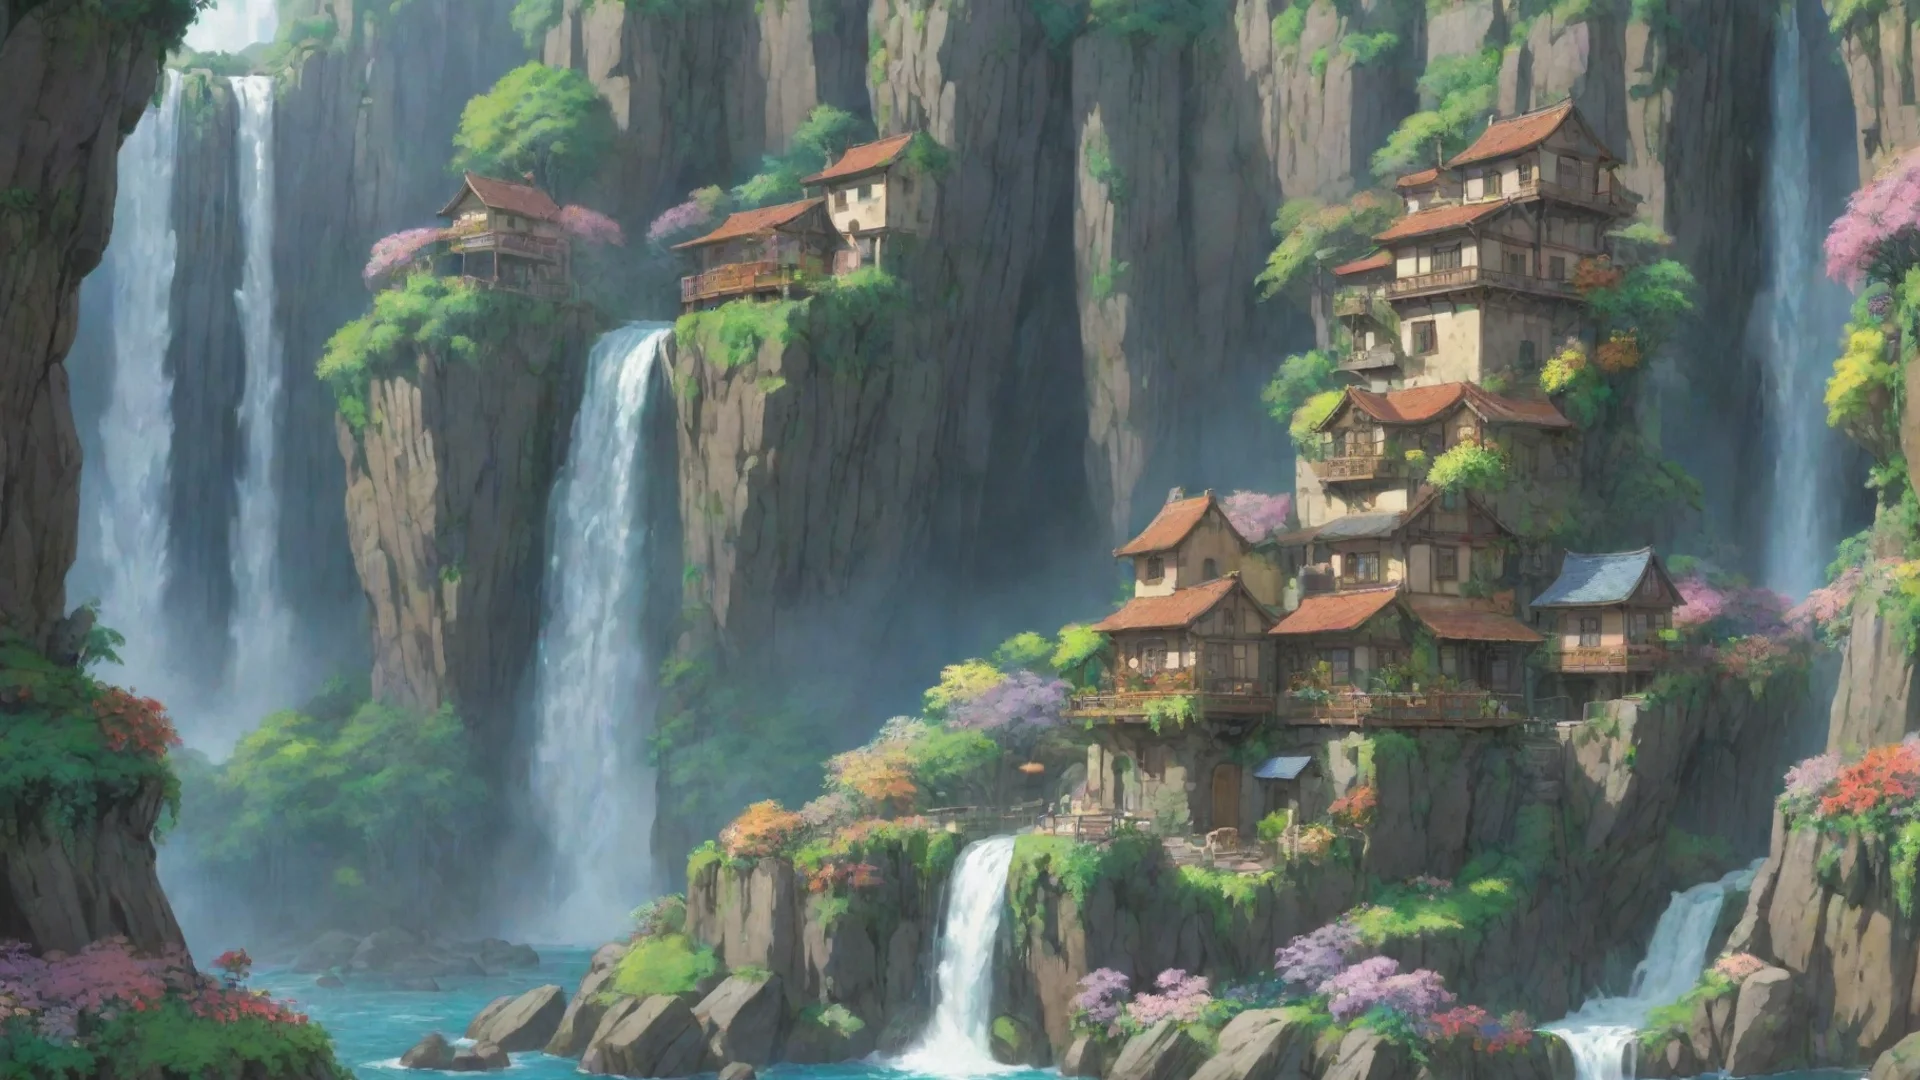 aiartstation art studio ghibli best award winning art environment sheer overhang cliff water fall city cute town with flowers hanging plants confident engaging wow 3 wide